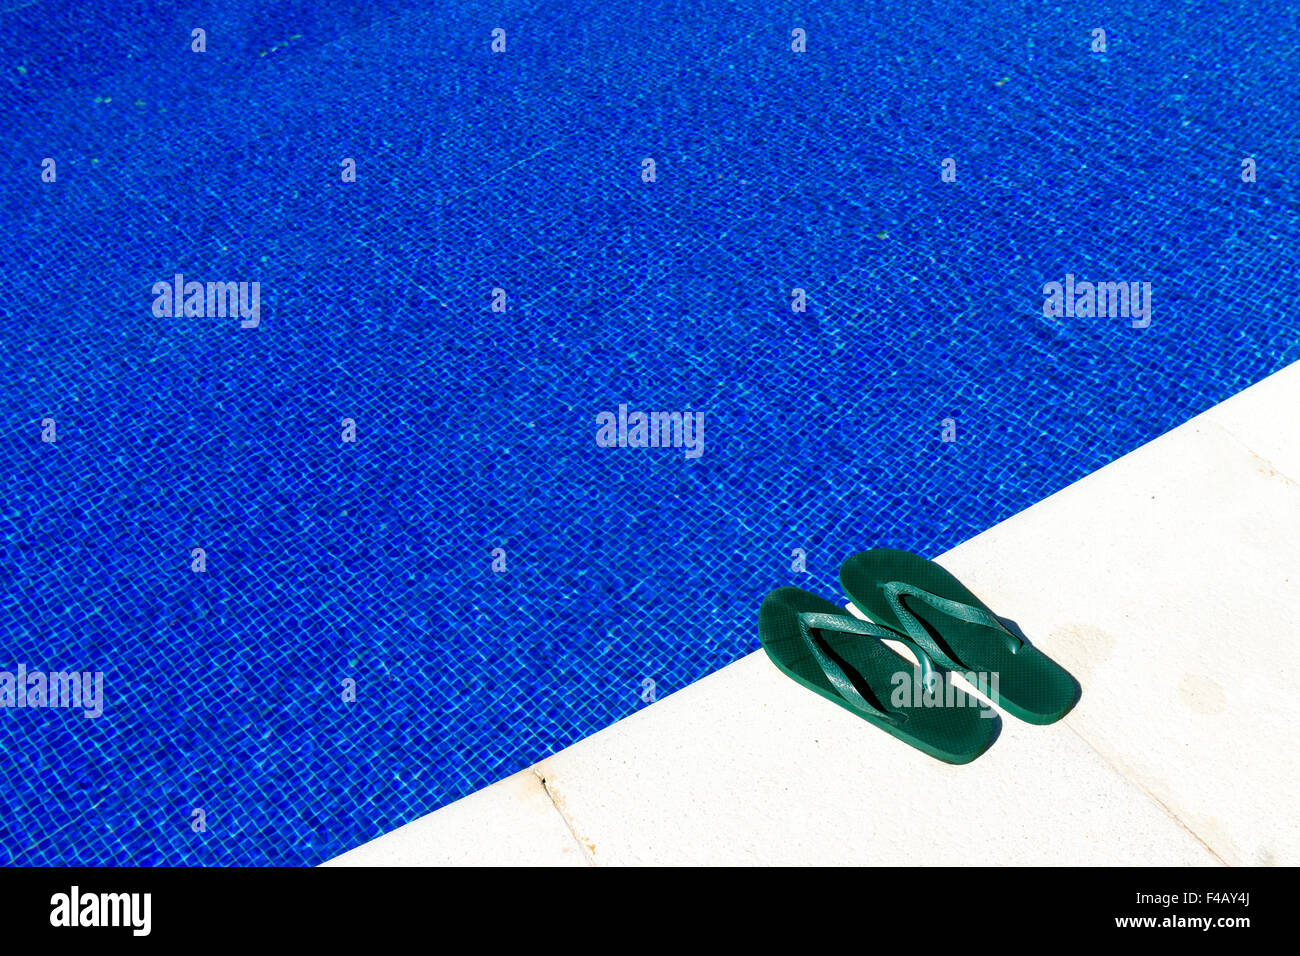 Swimming pool with flip-flops Stock Photo